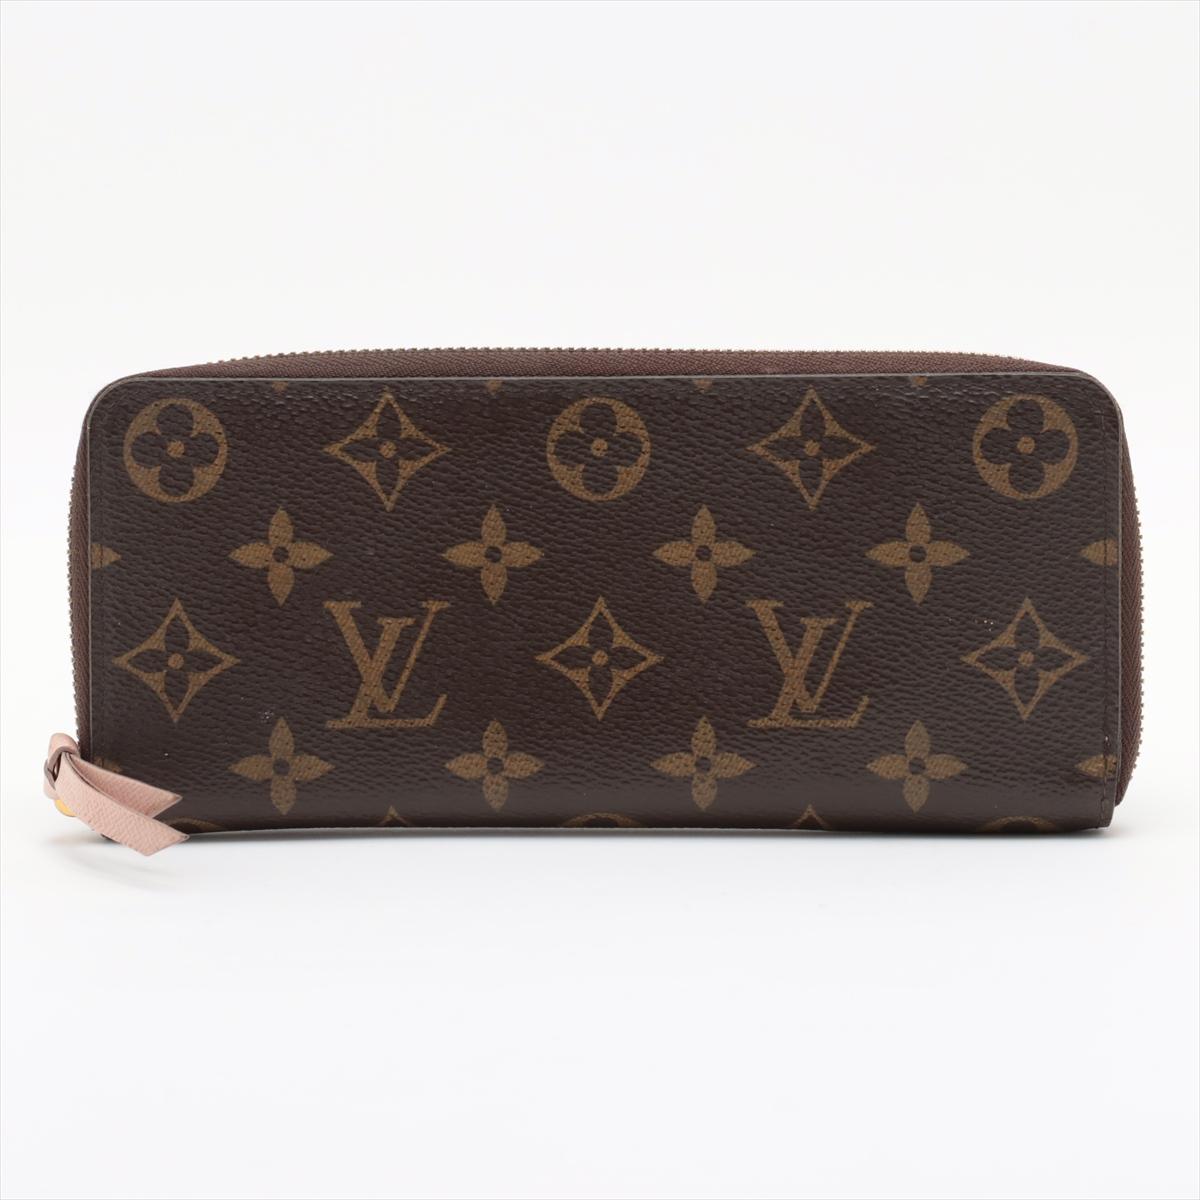 The Louis Vuitton Monogram Wallet Clemence in Rose Ballerine is a luxurious and feminine accessory that combines the iconic Monogram canvas with a delicate and charming pink hue. The design of the wallet showcases the brand's classic Monogram